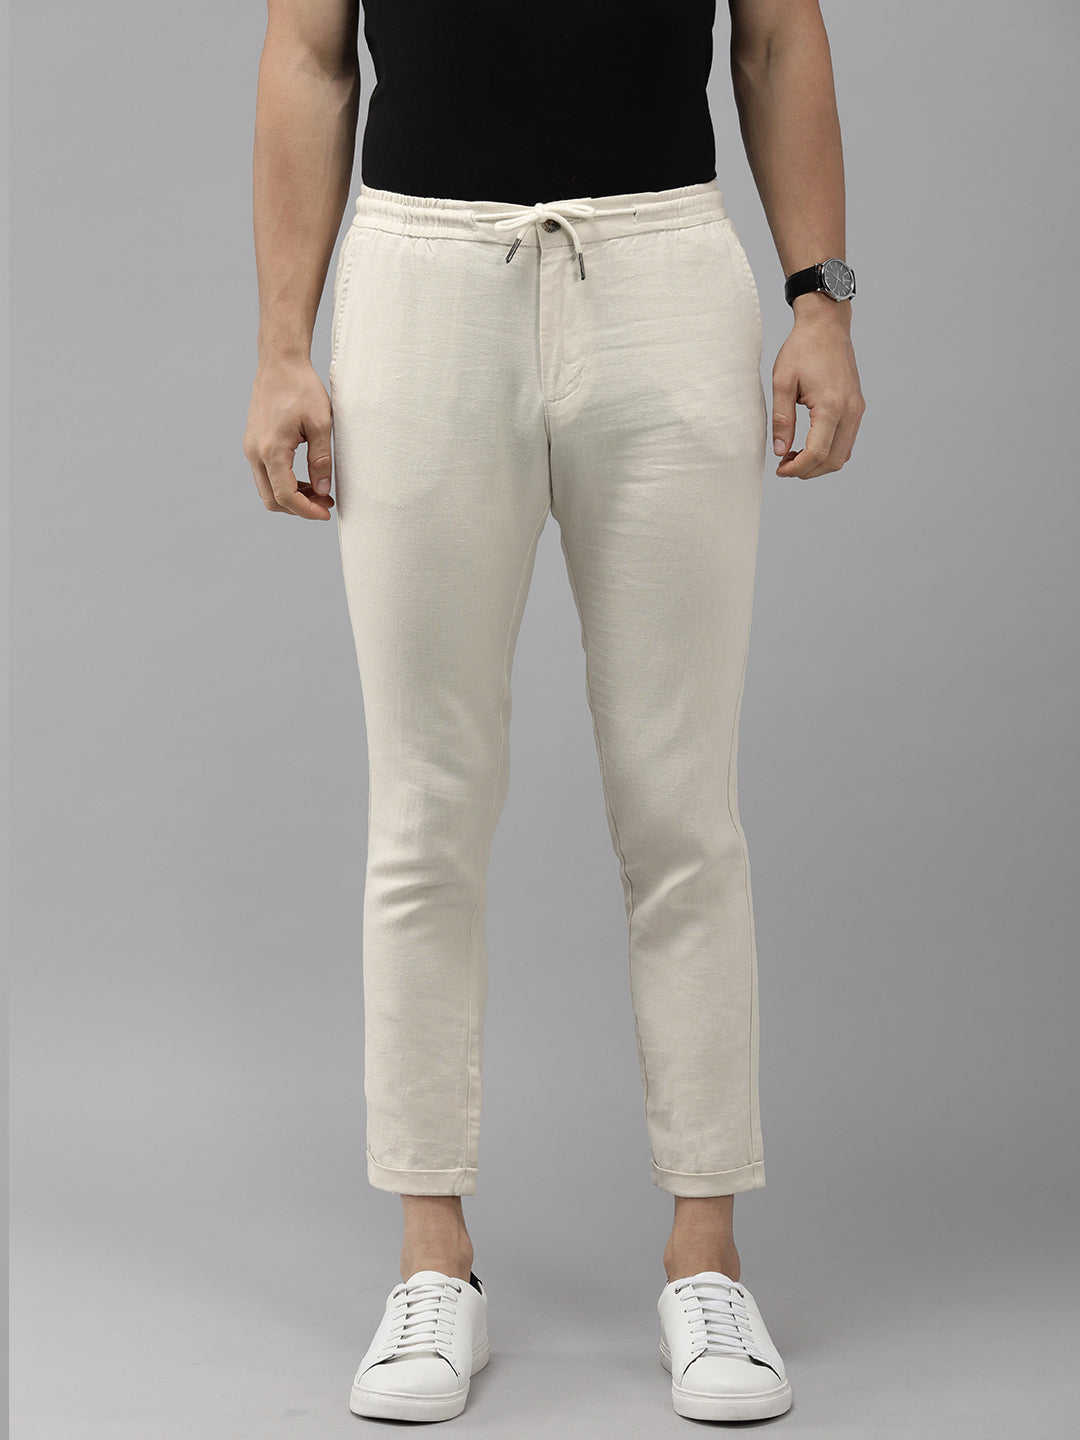 Cider Trousers and Pants  Buy Cider Solid Tapered Trousers Online  Nykaa  Fashion